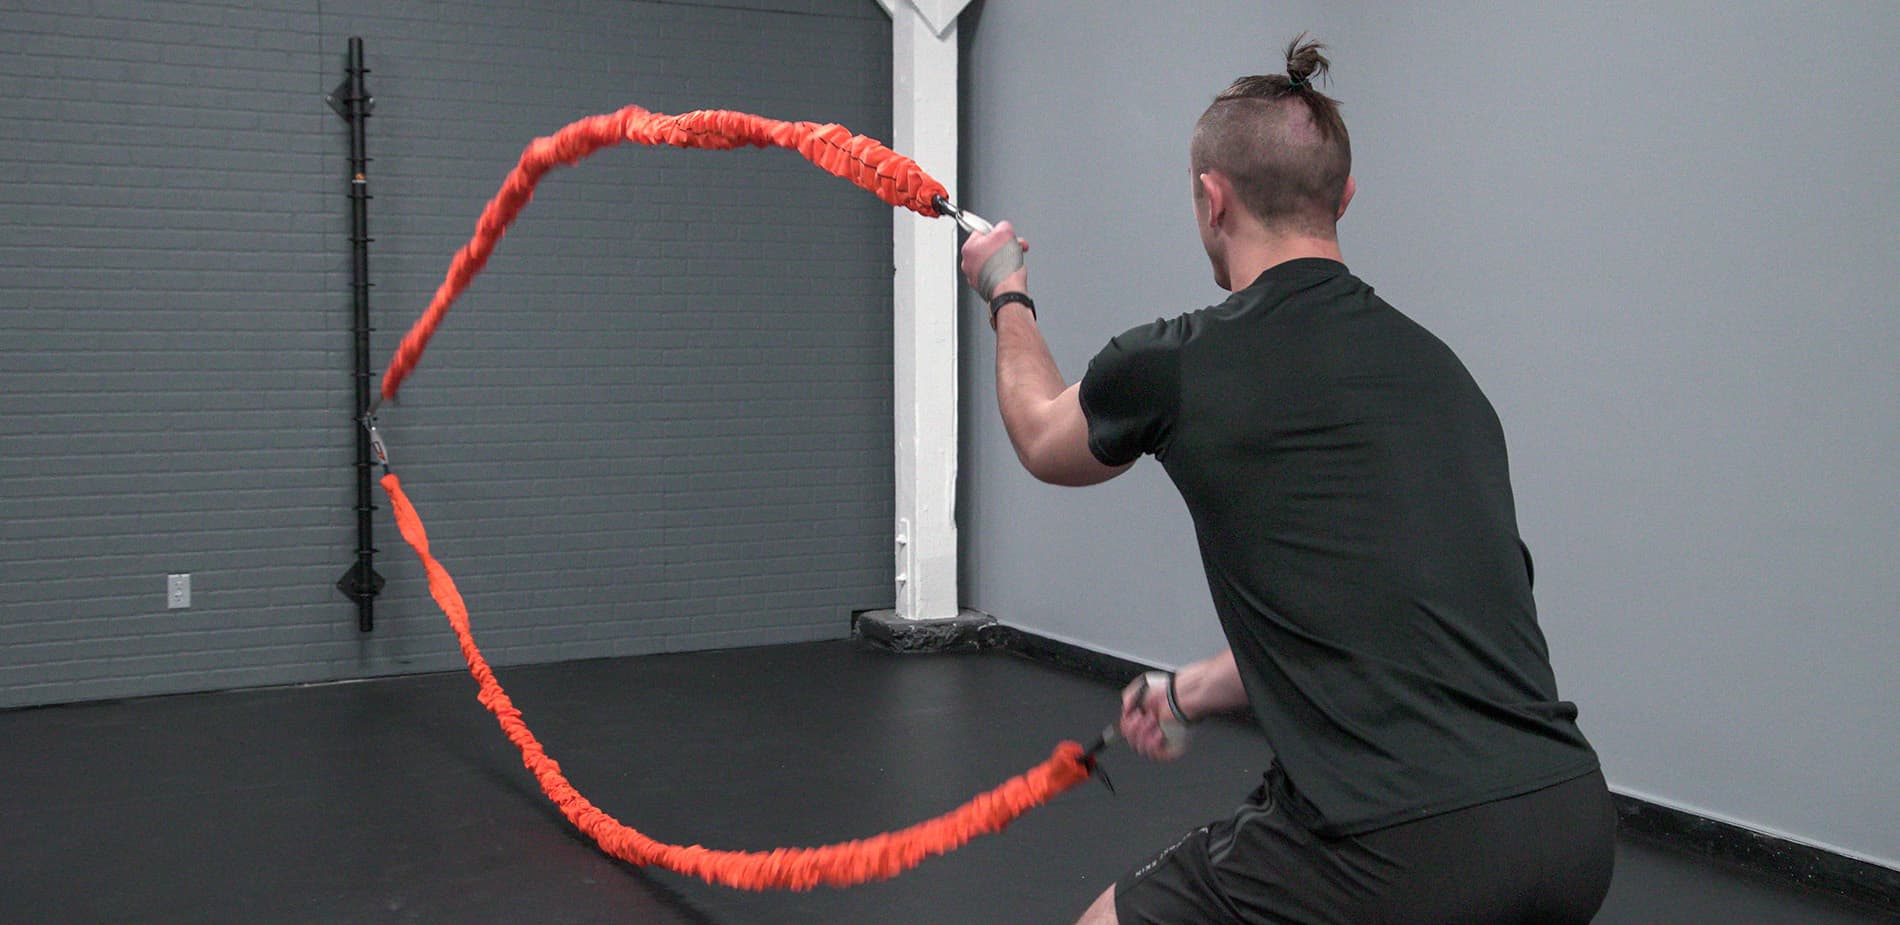 https://stroops.com/wp-content/uploads/2018/12/Stroops-Trainer-Caysem-The-Beast-VS-Battle-Ropes-Optimize-Weekly.jpg